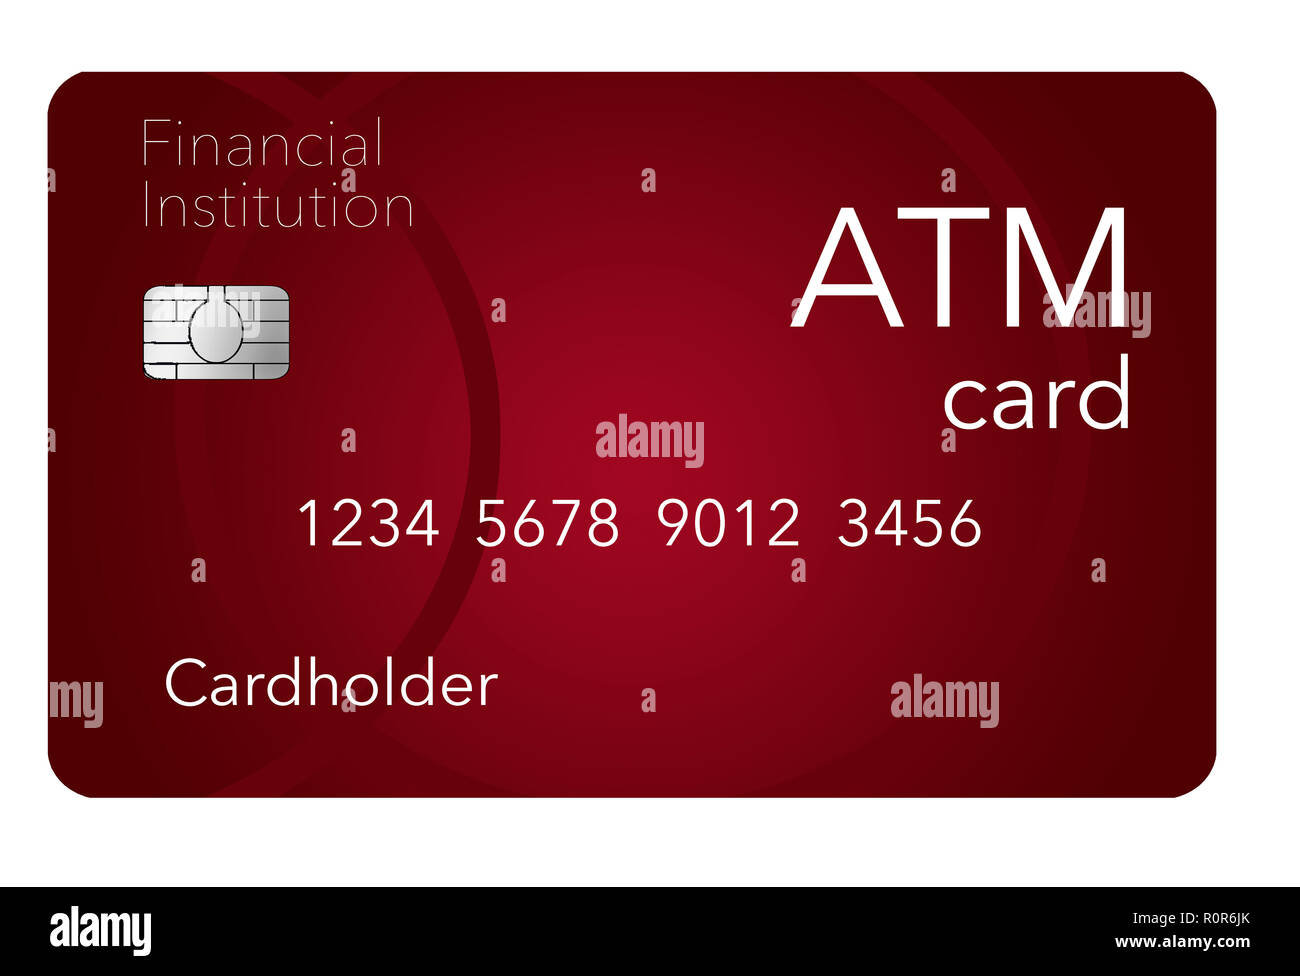 Atm Card High Resolution Stock Photography and Images - Alamy